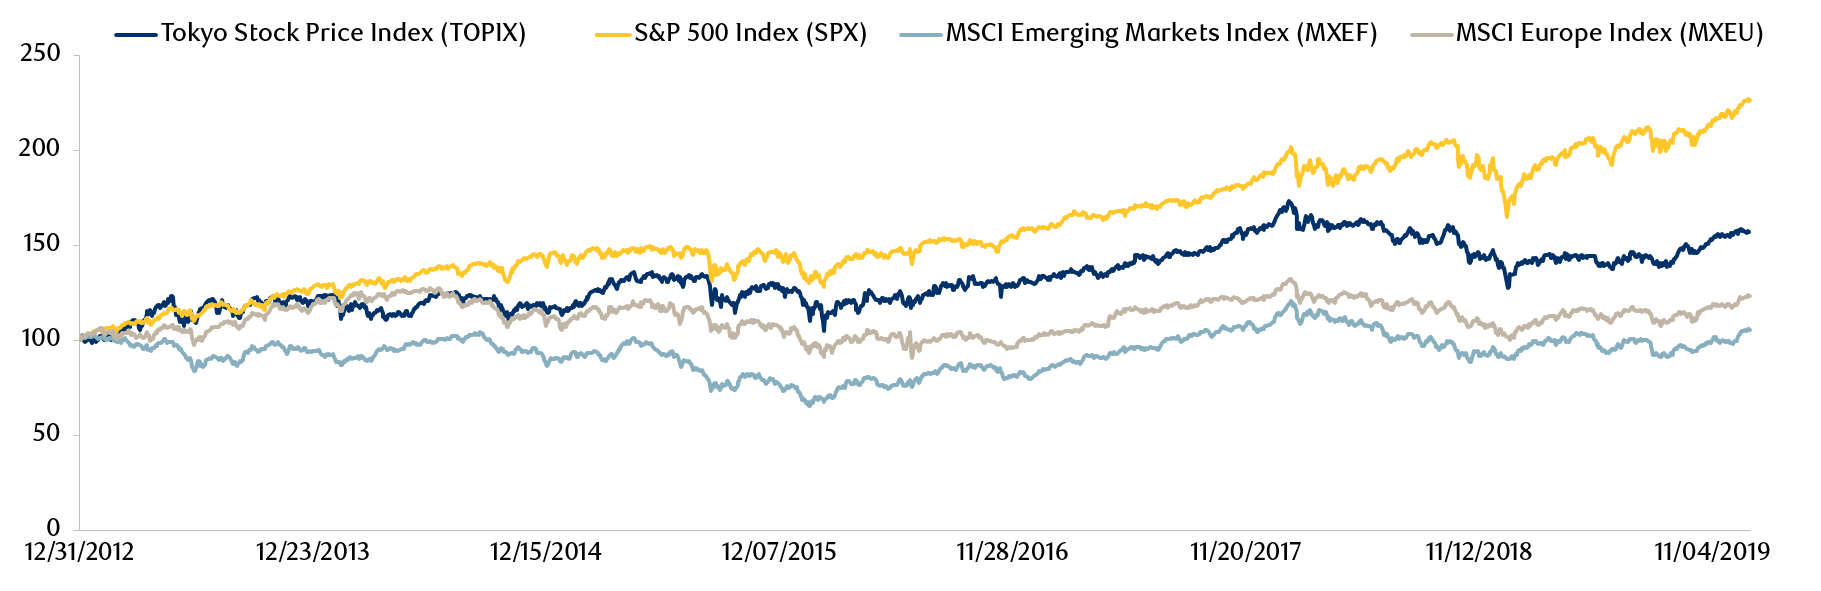 Exhibit 1:  Japanese equity price performance relative to other major indexes since 2012